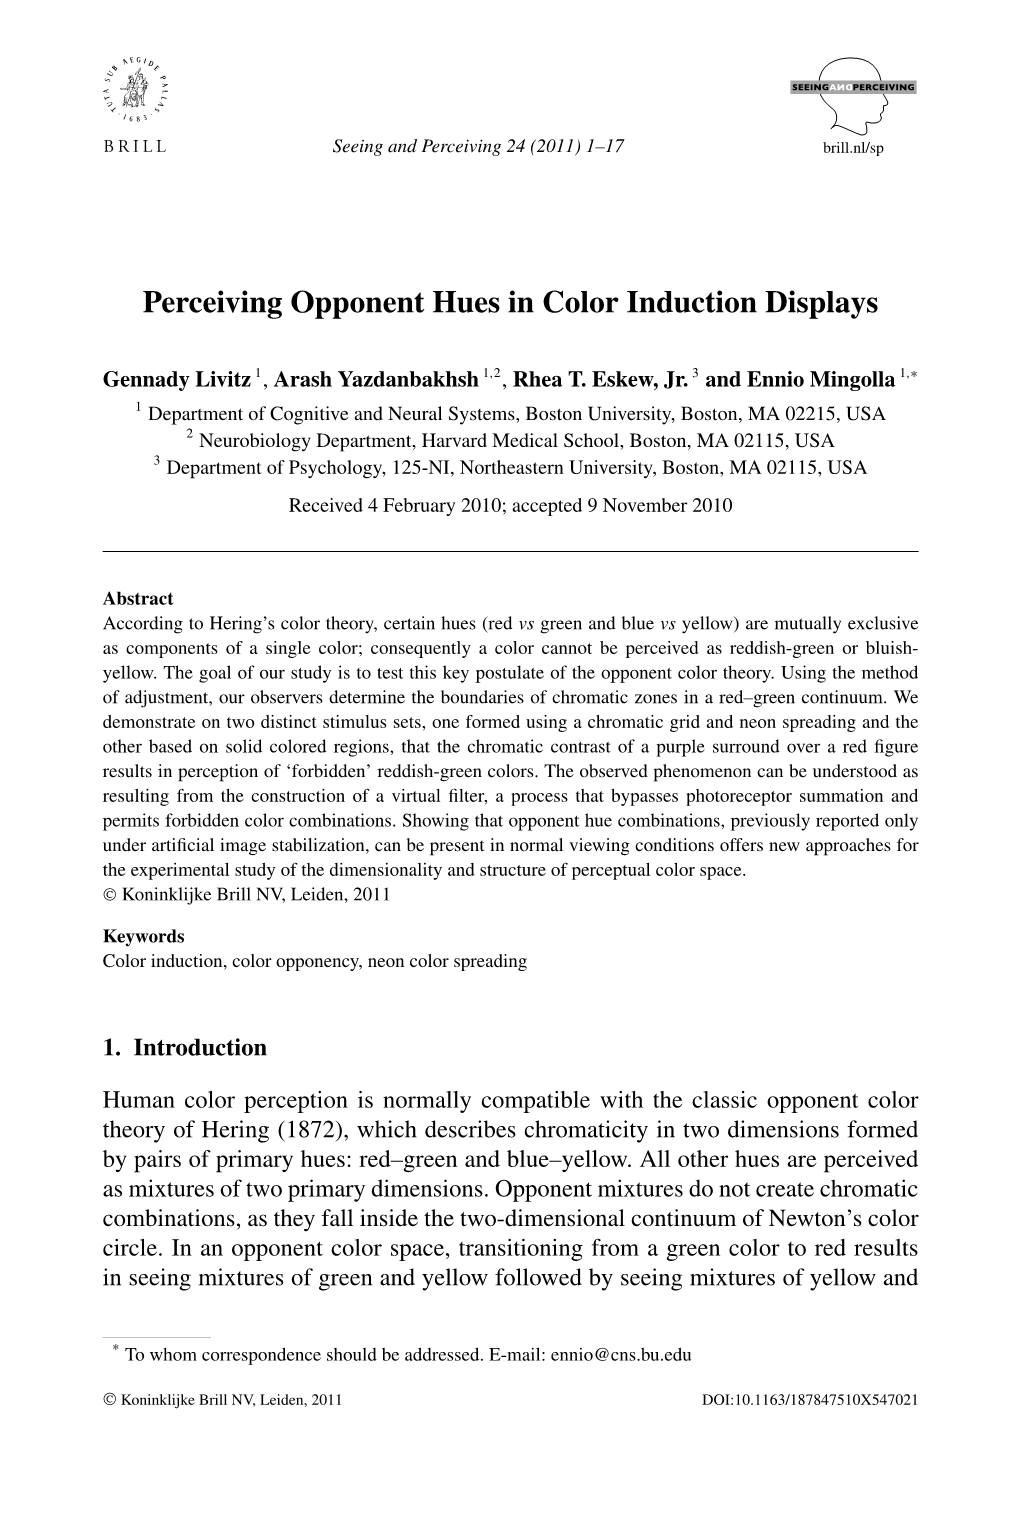 Perceiving Opponent Hues in Color Induction Displays